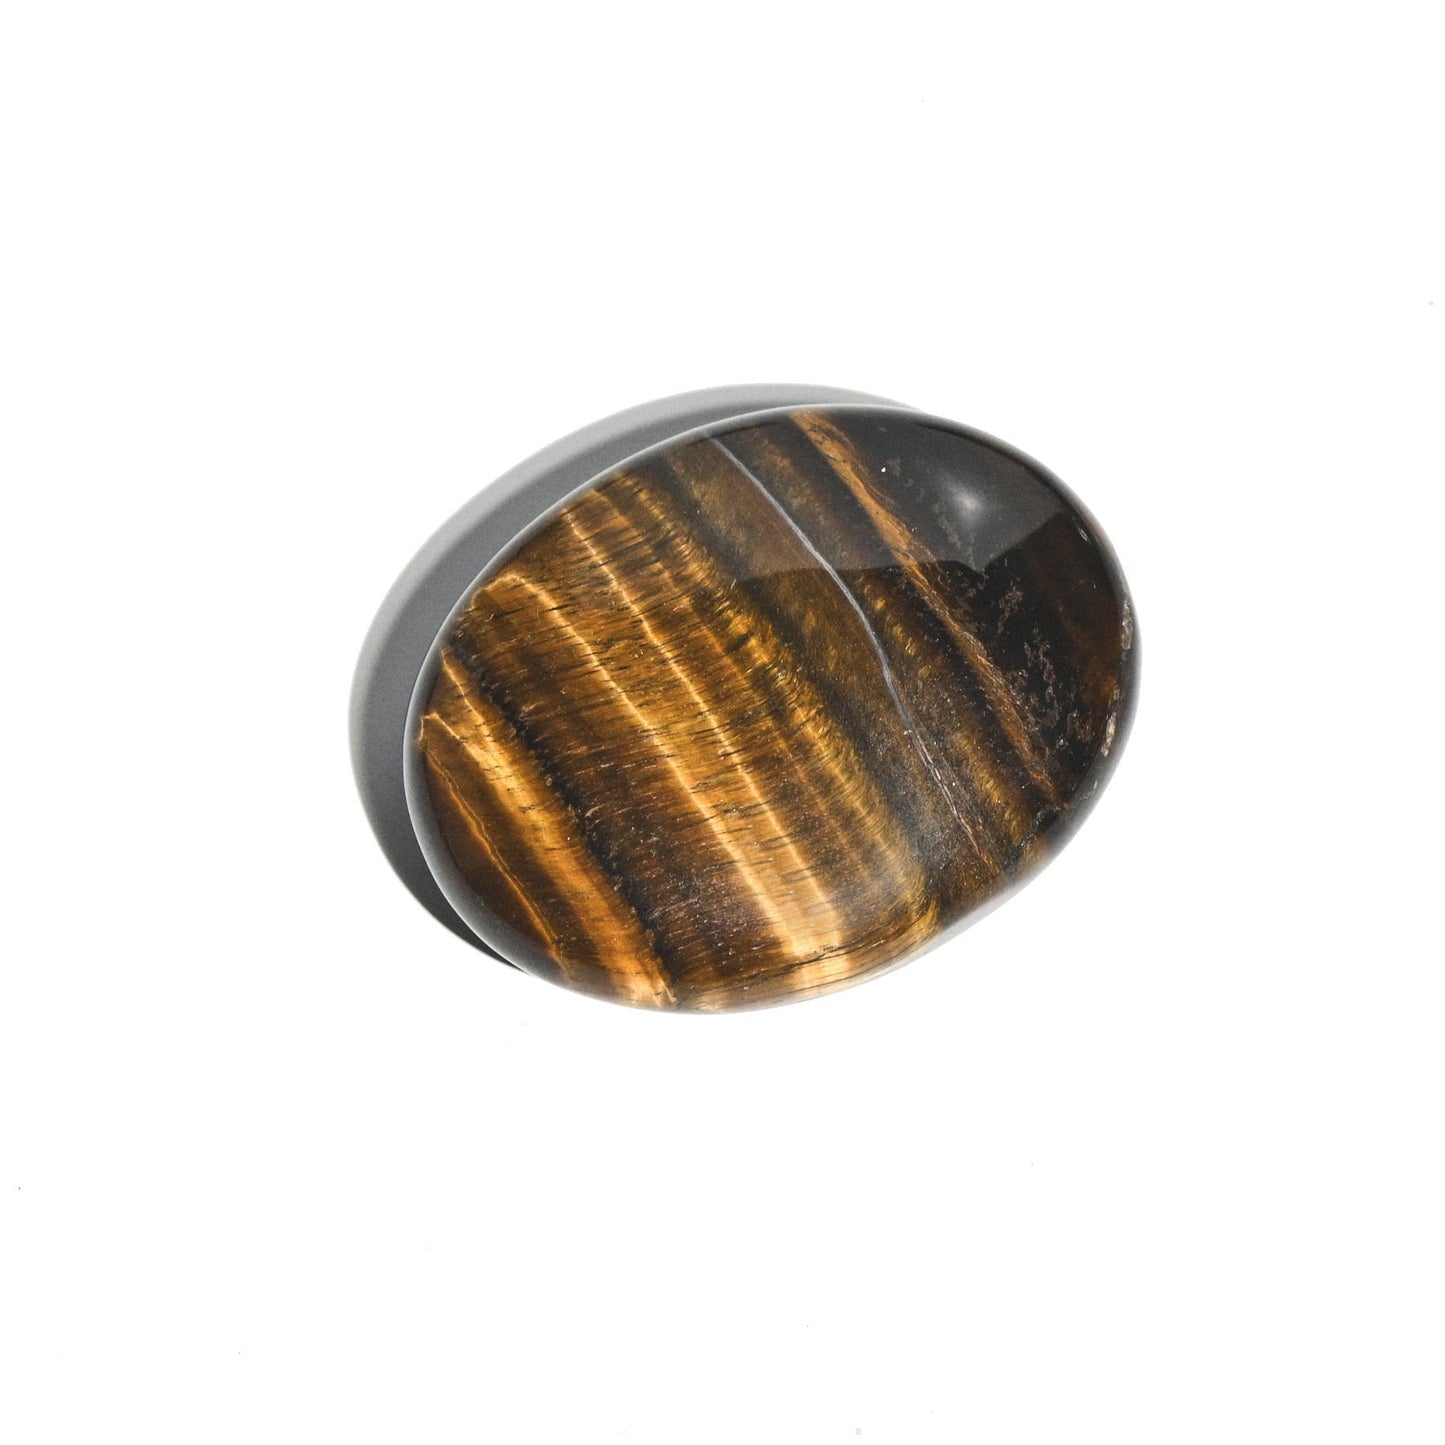 tigers eye meaning